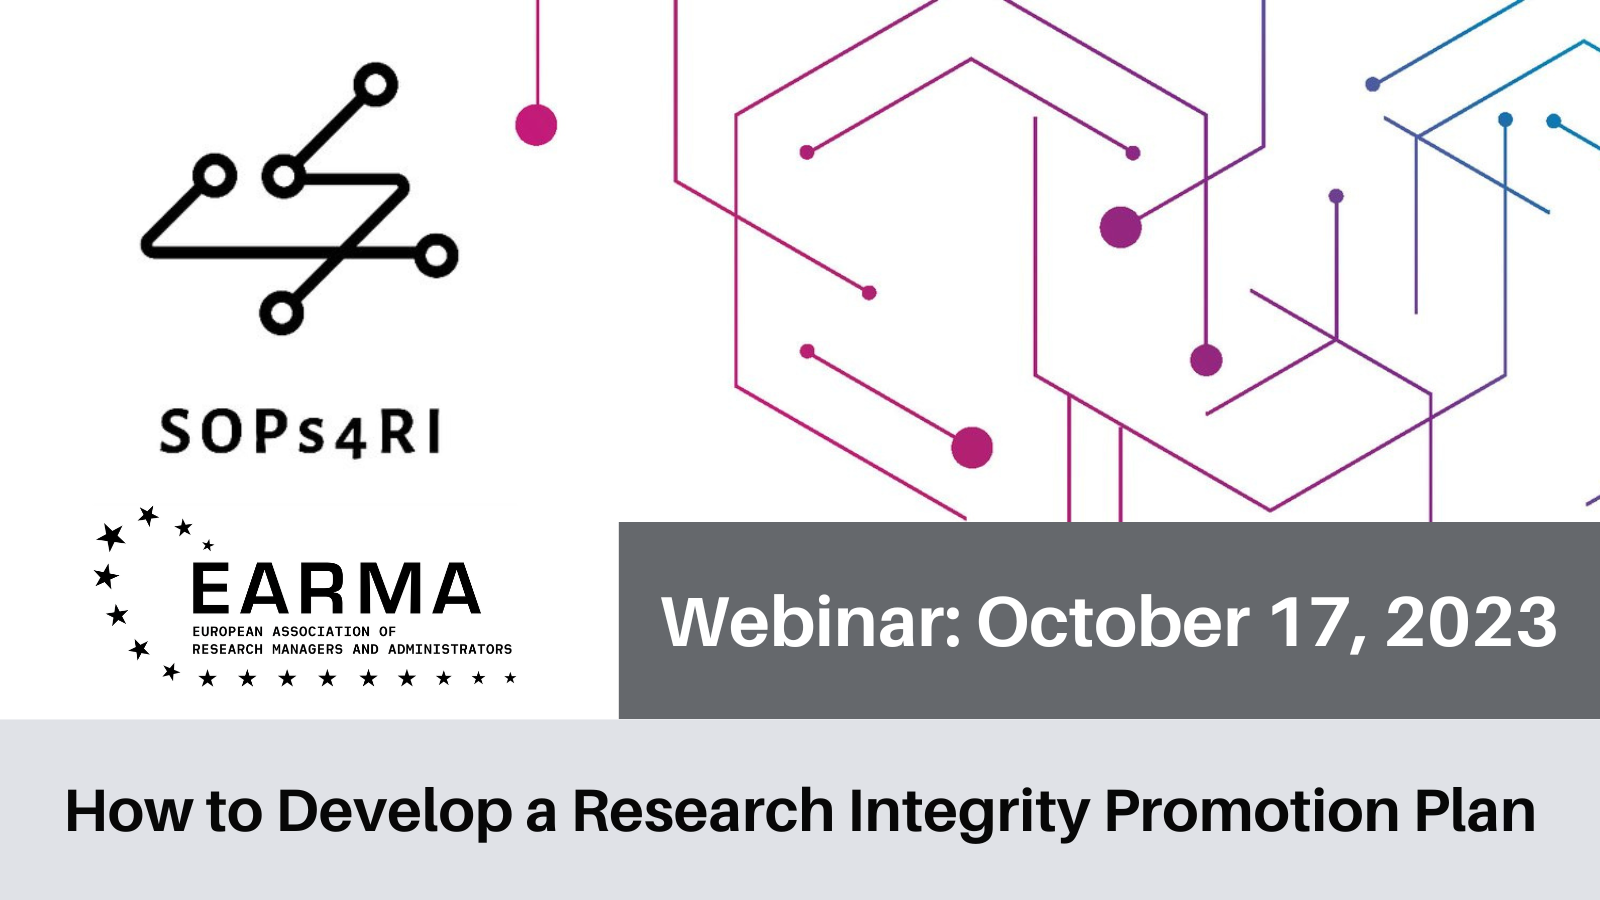 How to Develop a Research Integrity Promotion Plan